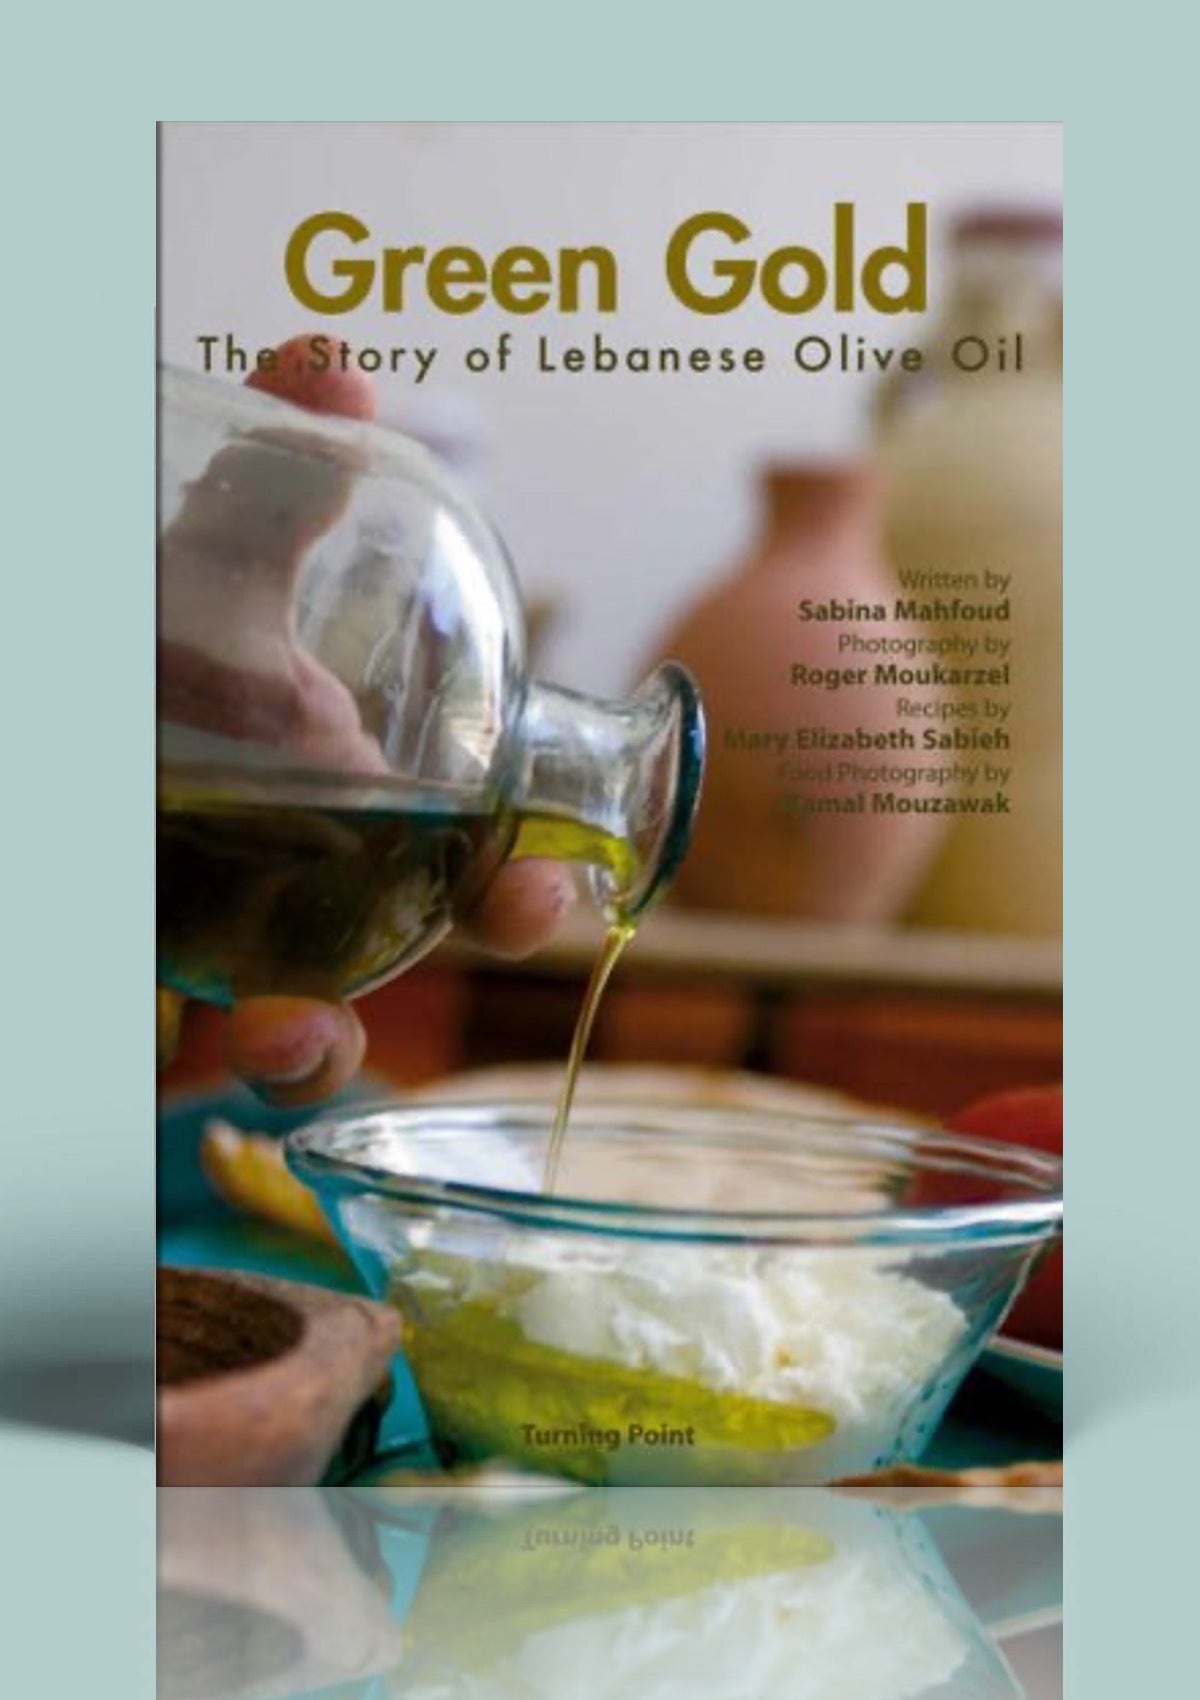 Green Gold: The Story of Lebanese Olive Oil